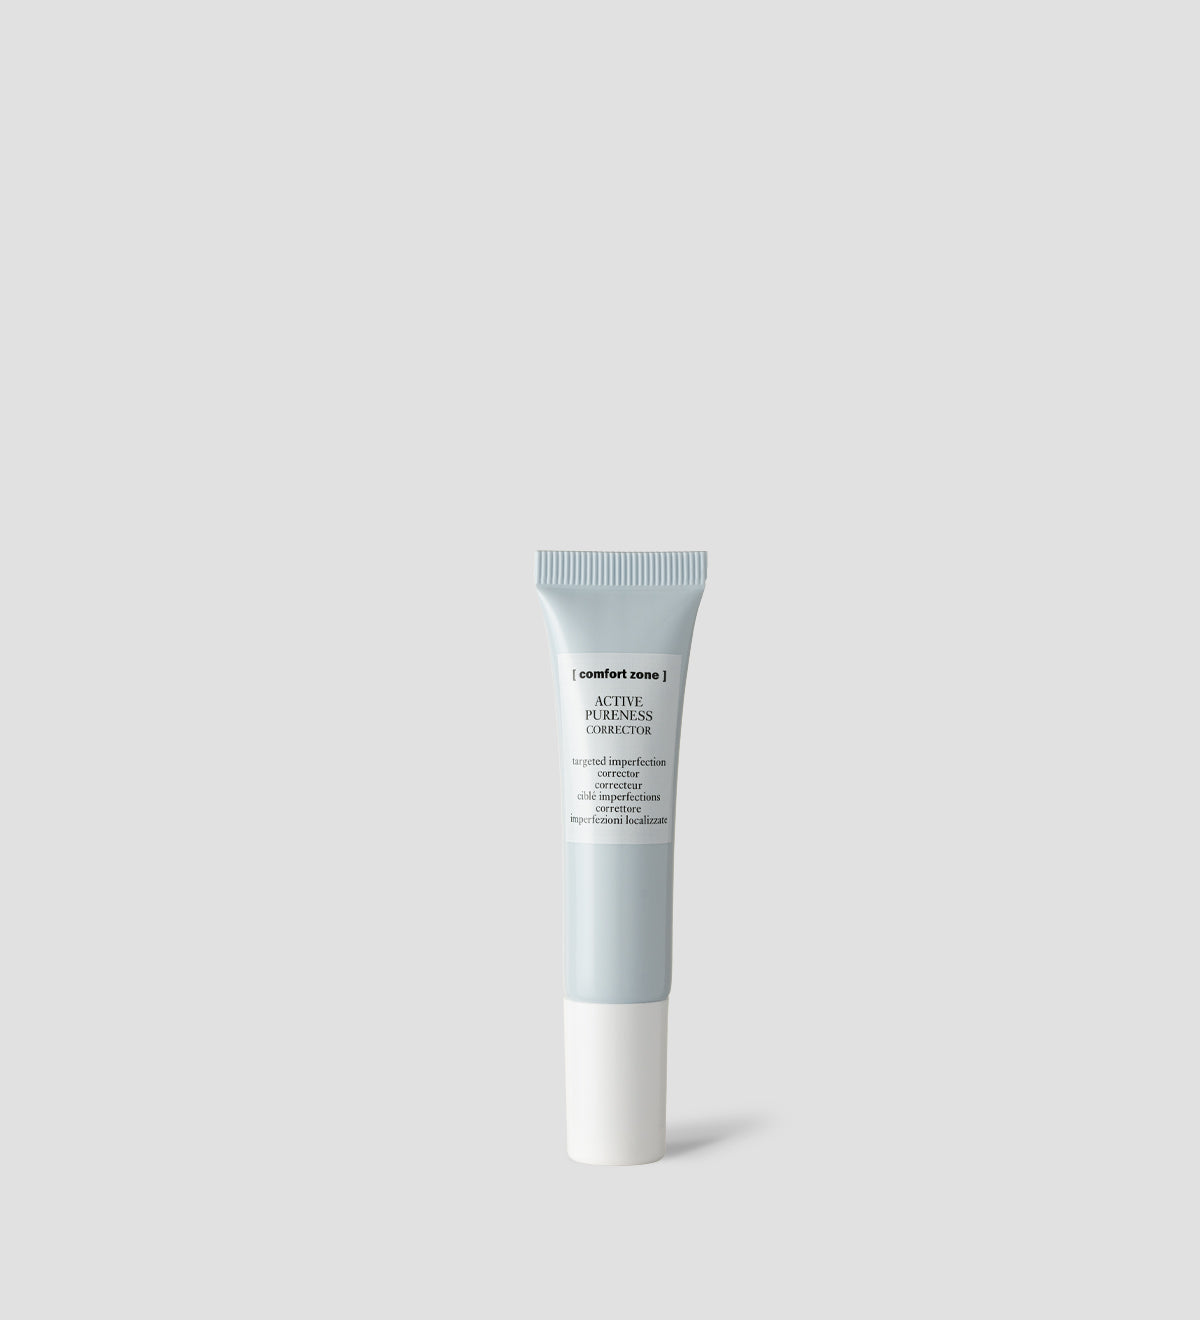 Comfort Zone: ACTIVE PURENESS CORRECTOR  Targeted imperfection corrector -
